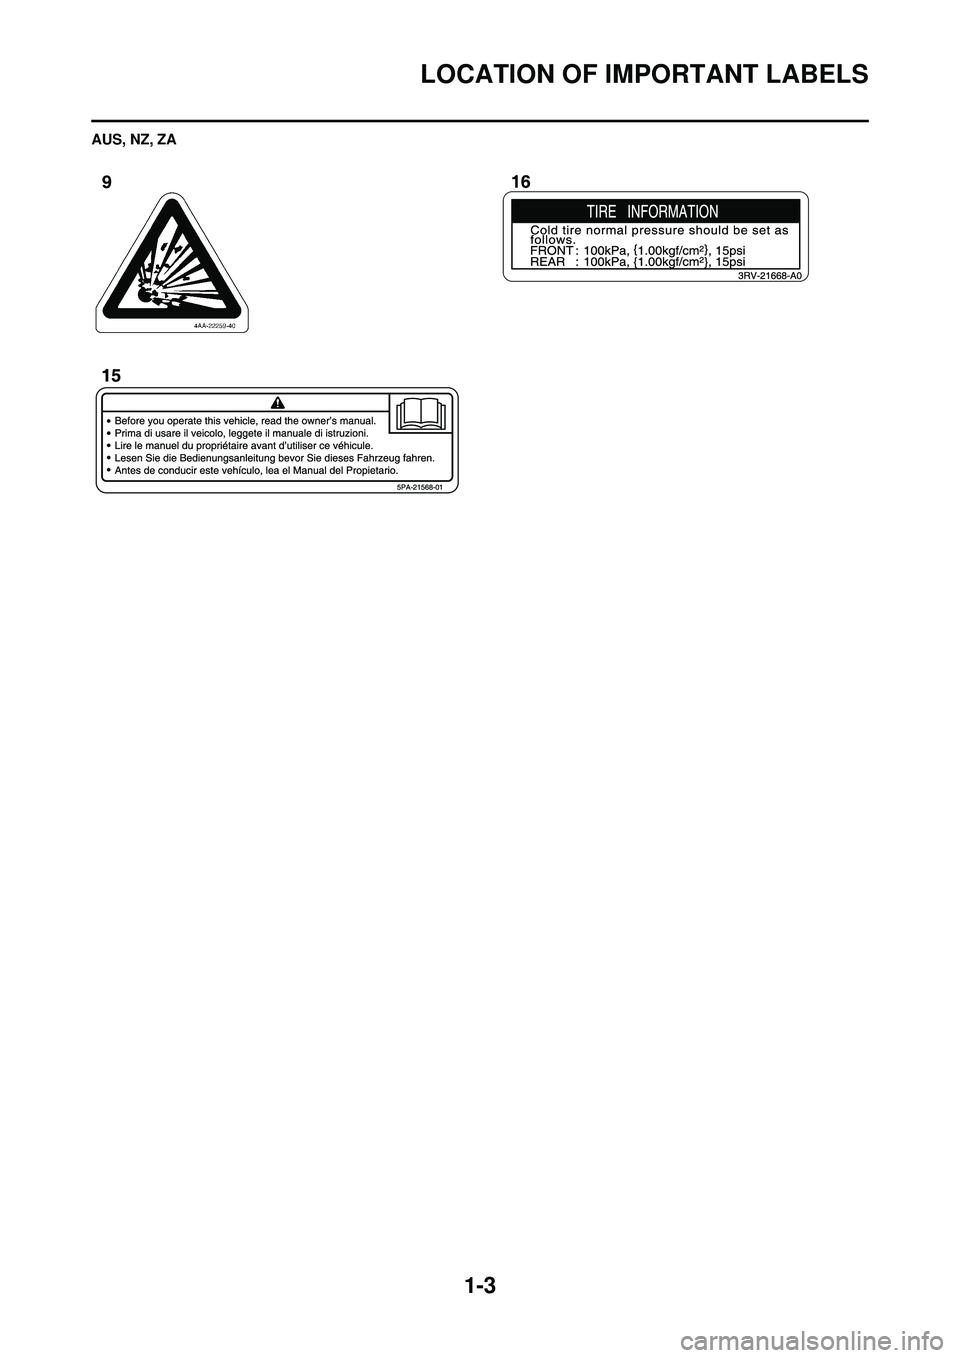 YAMAHA WR 250F 2010 User Guide 1-3
LOCATION OF IMPORTANT LABELS
AUS, NZ, ZA 